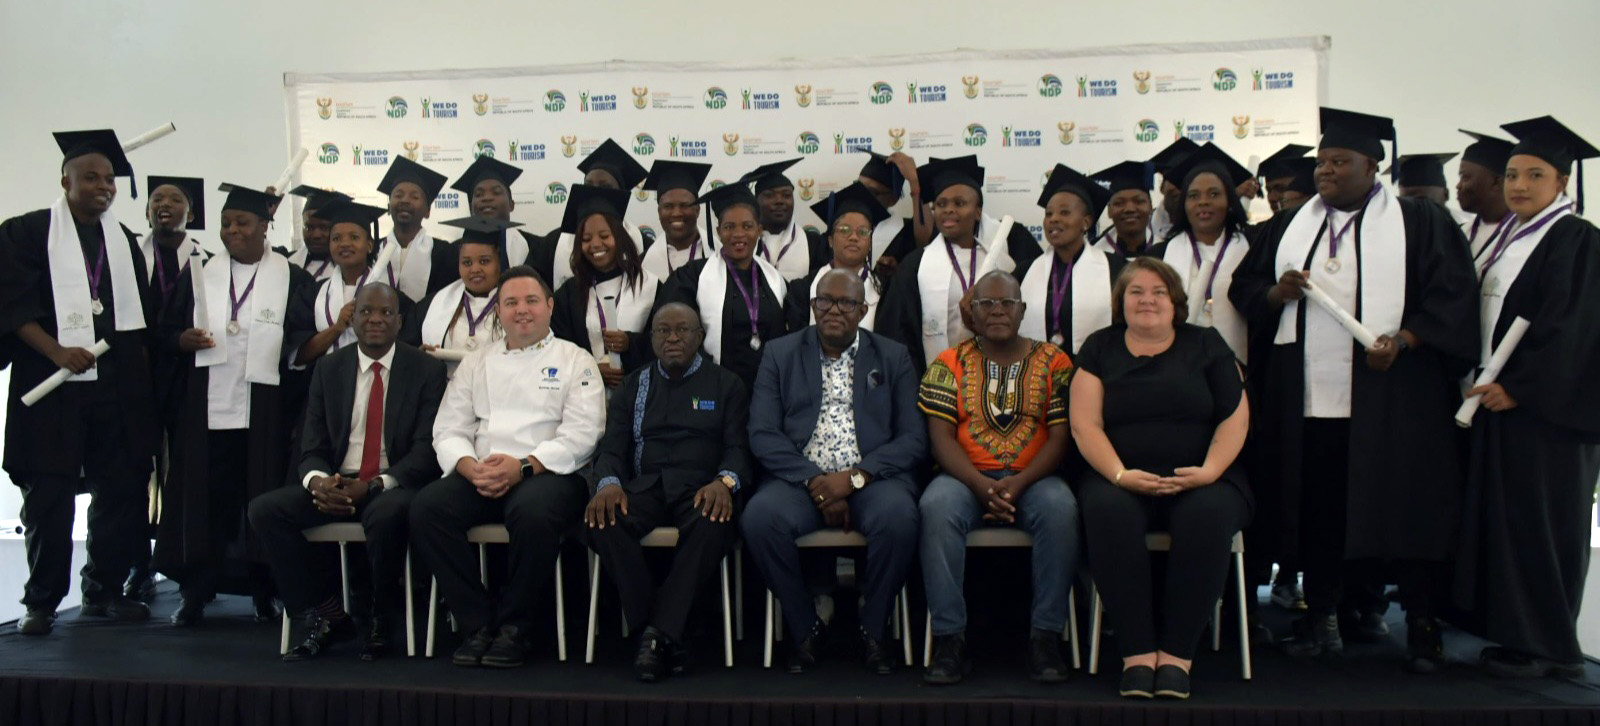 Recognition of prior learning recognises 30 Limpopo chefs